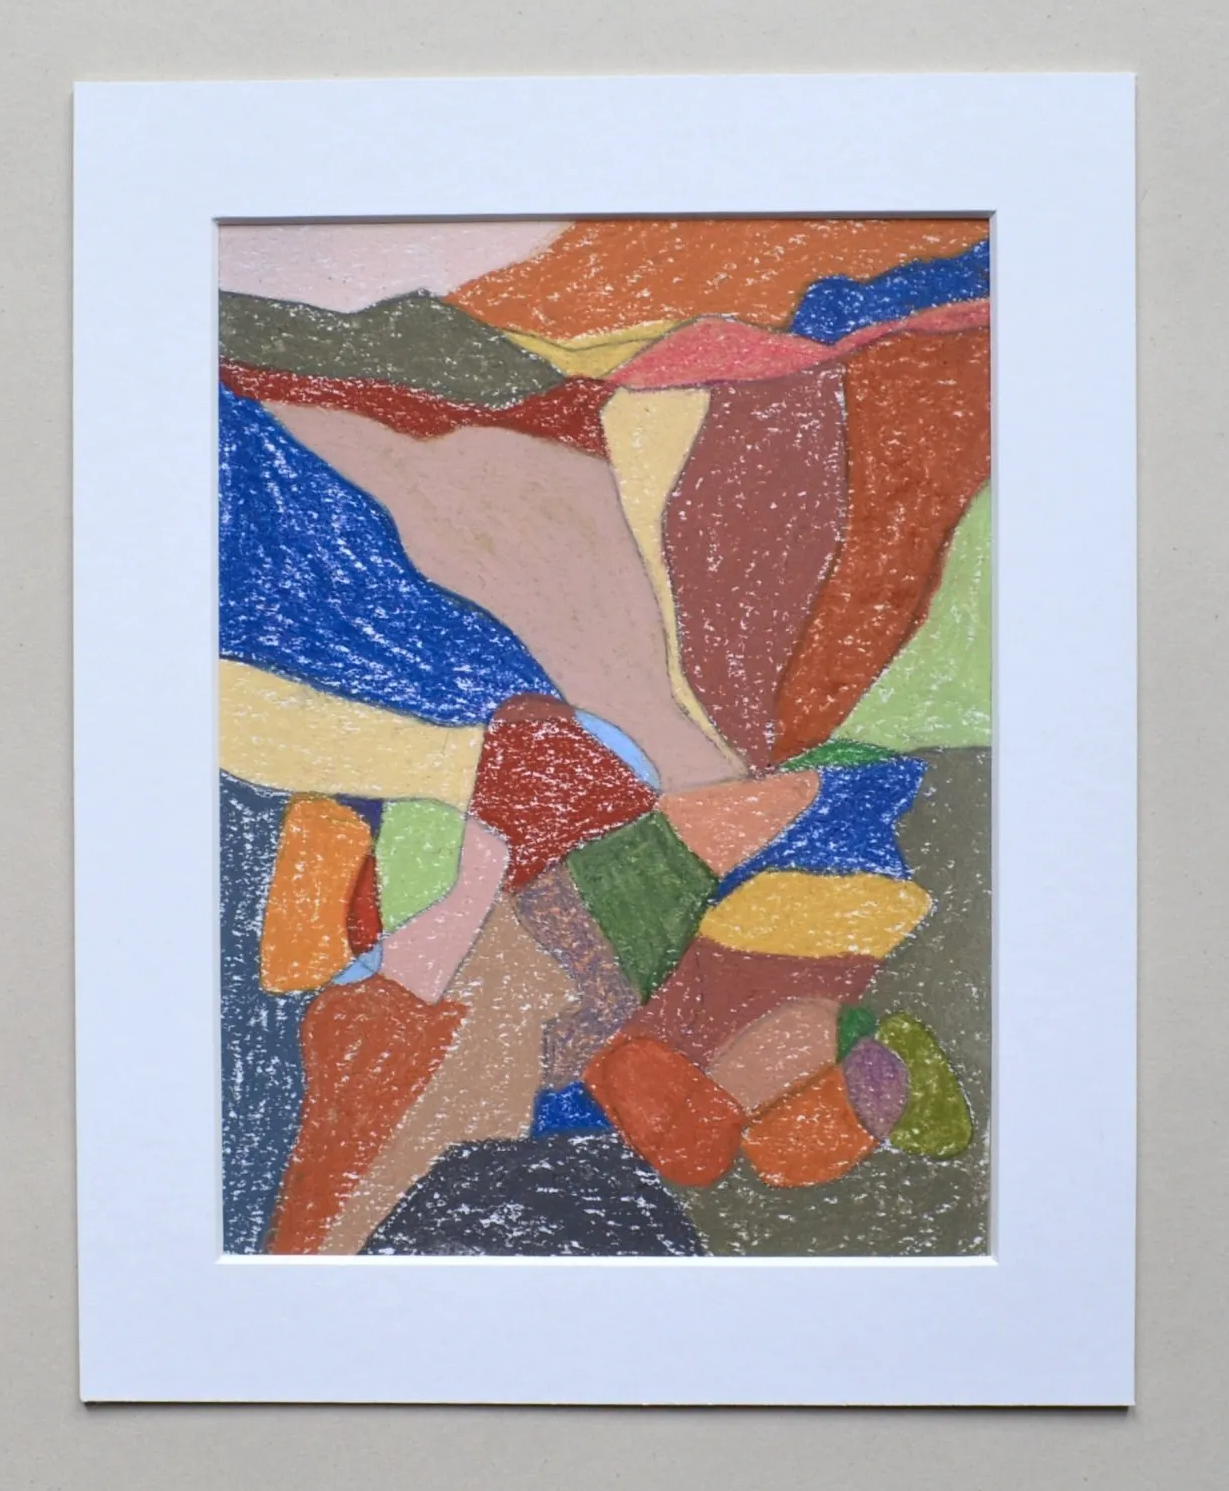 Colourful abstract drawing with white frame on a grey background